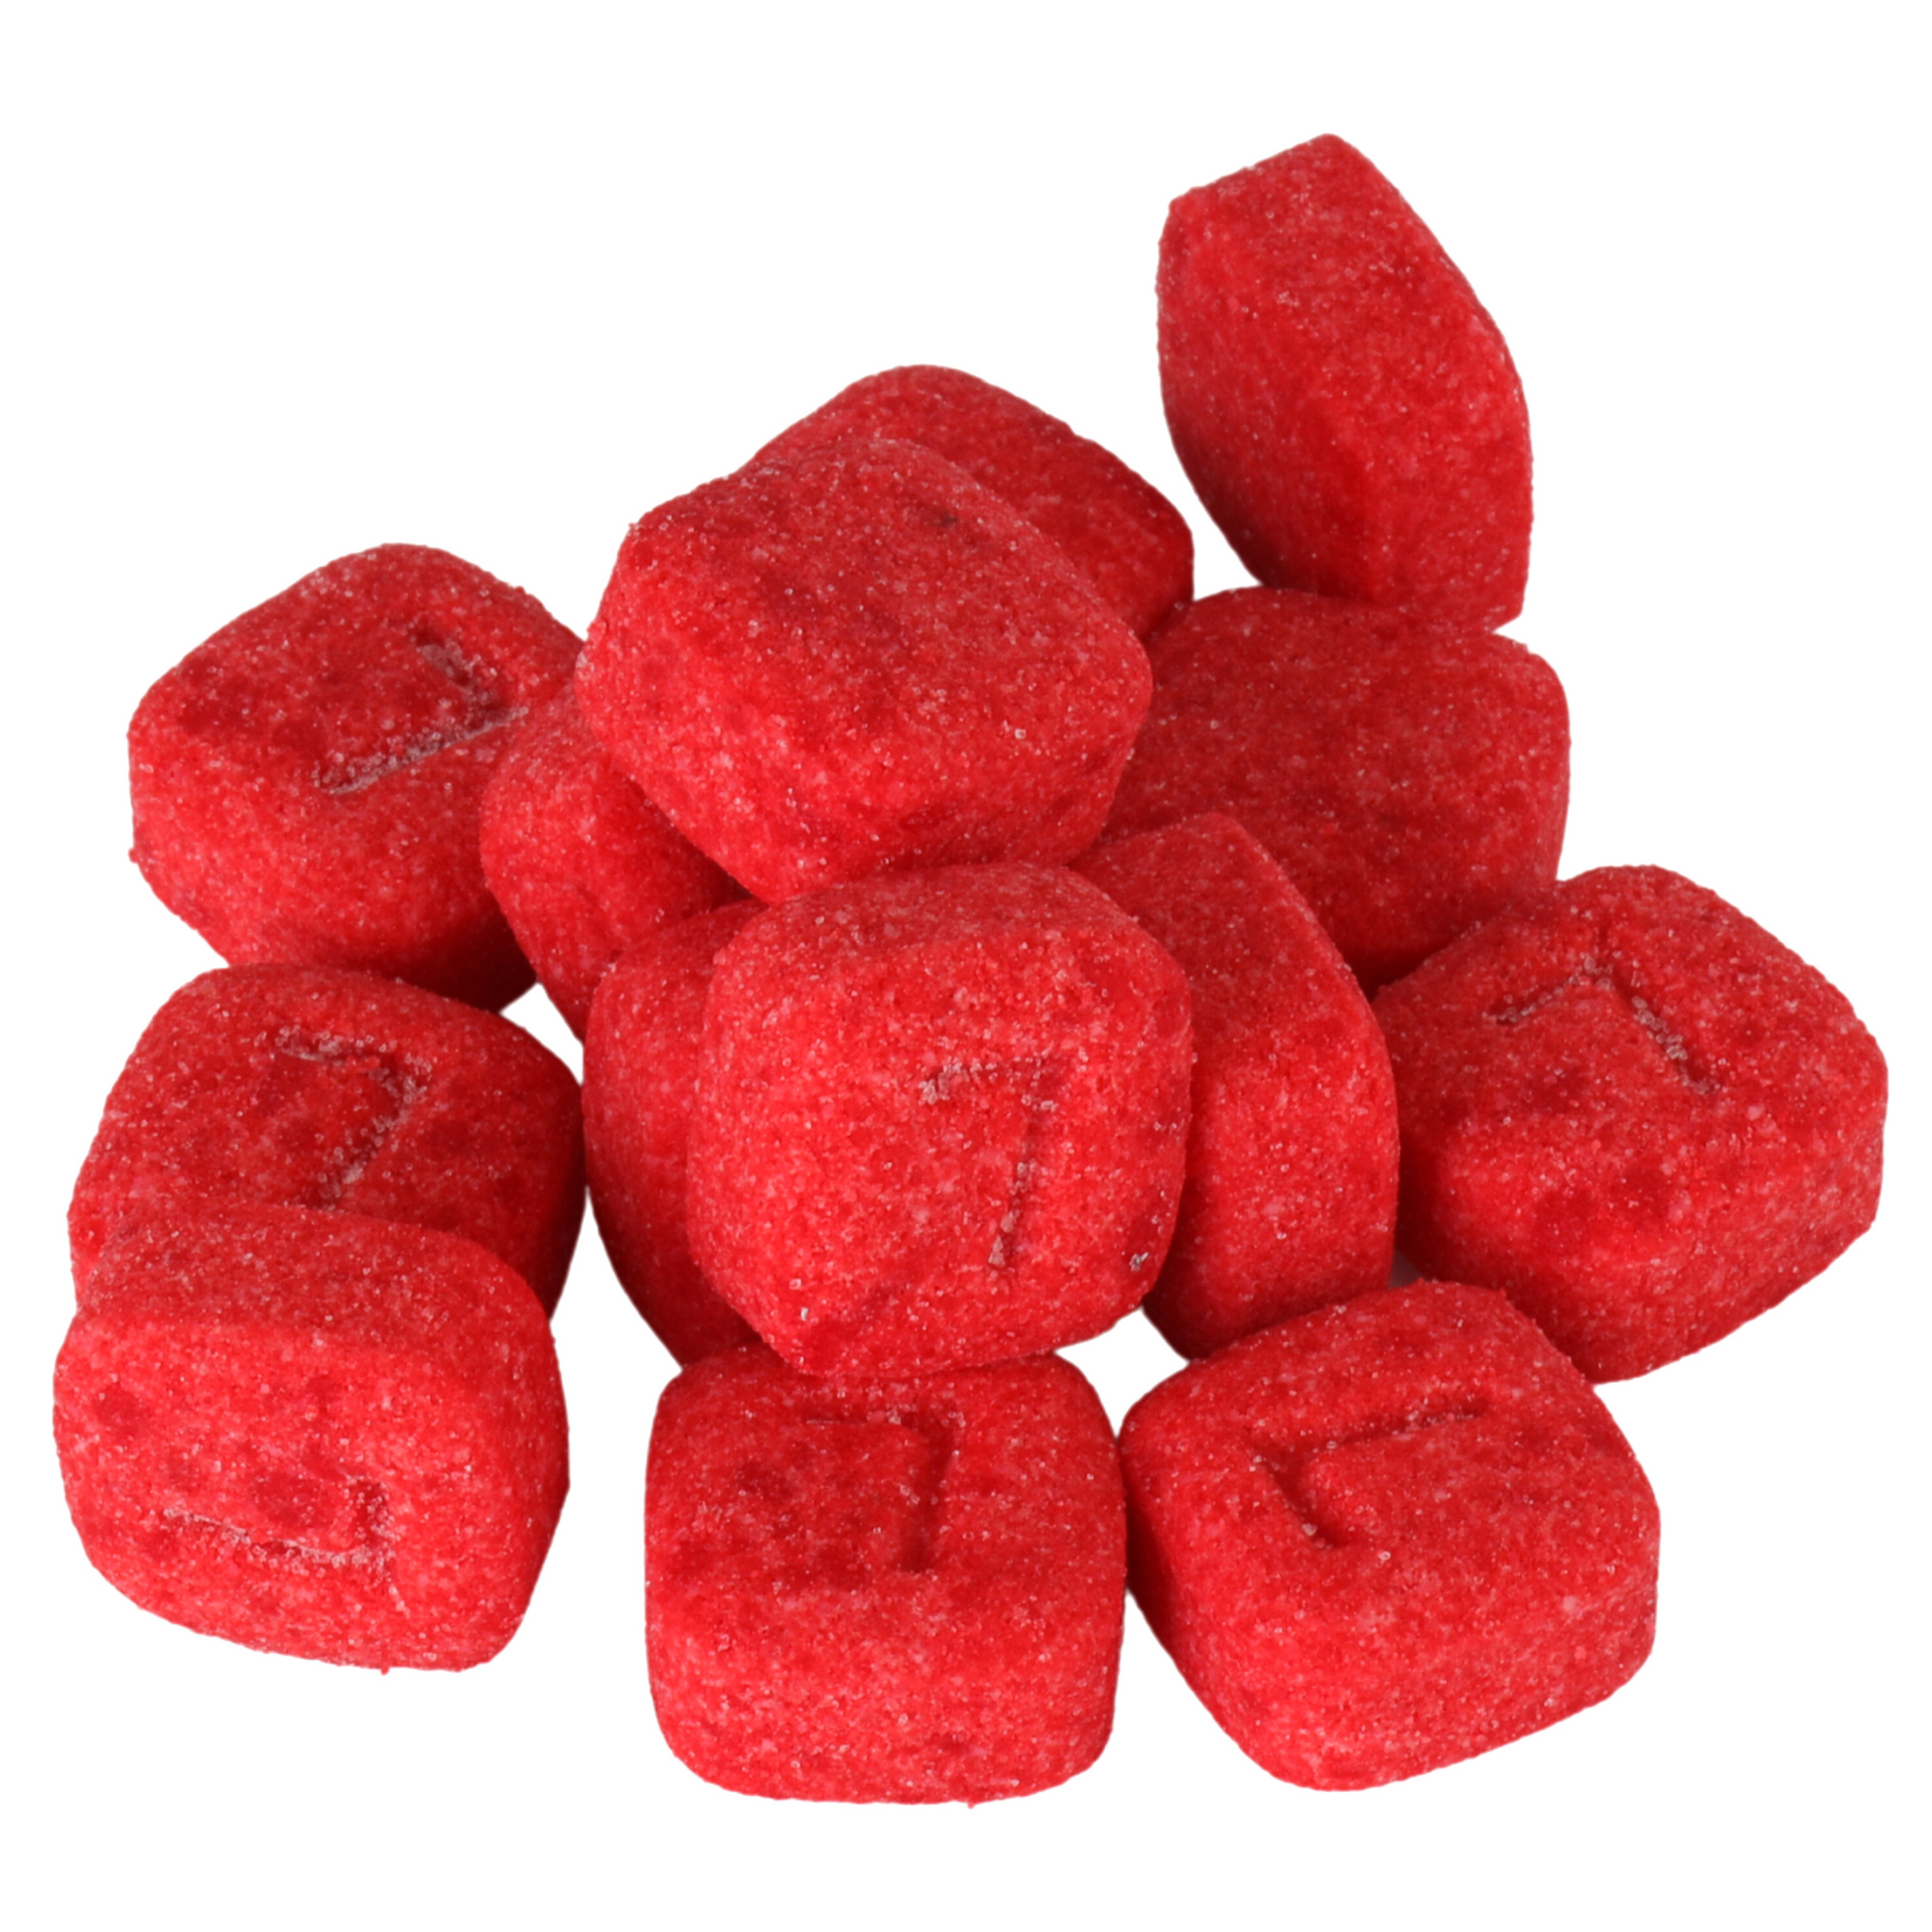 Gas Relief Soft Chewables in Mixed Berry not only taste good, but they are also easy for people that don't like to swallow pills.